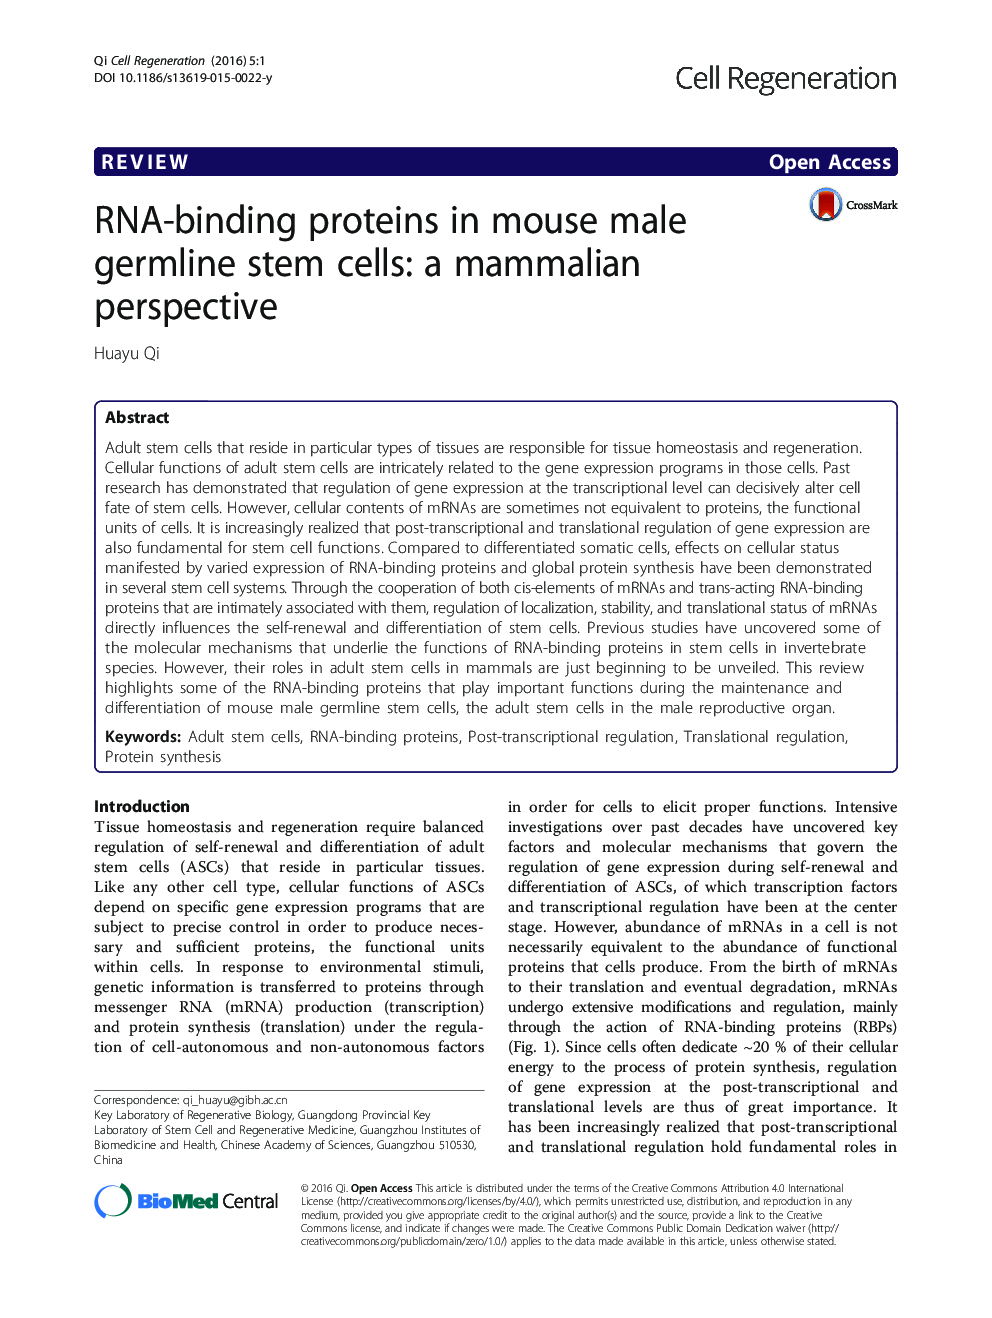 RNA-binding proteins in mouse male germline stem cells: a mammalian perspective